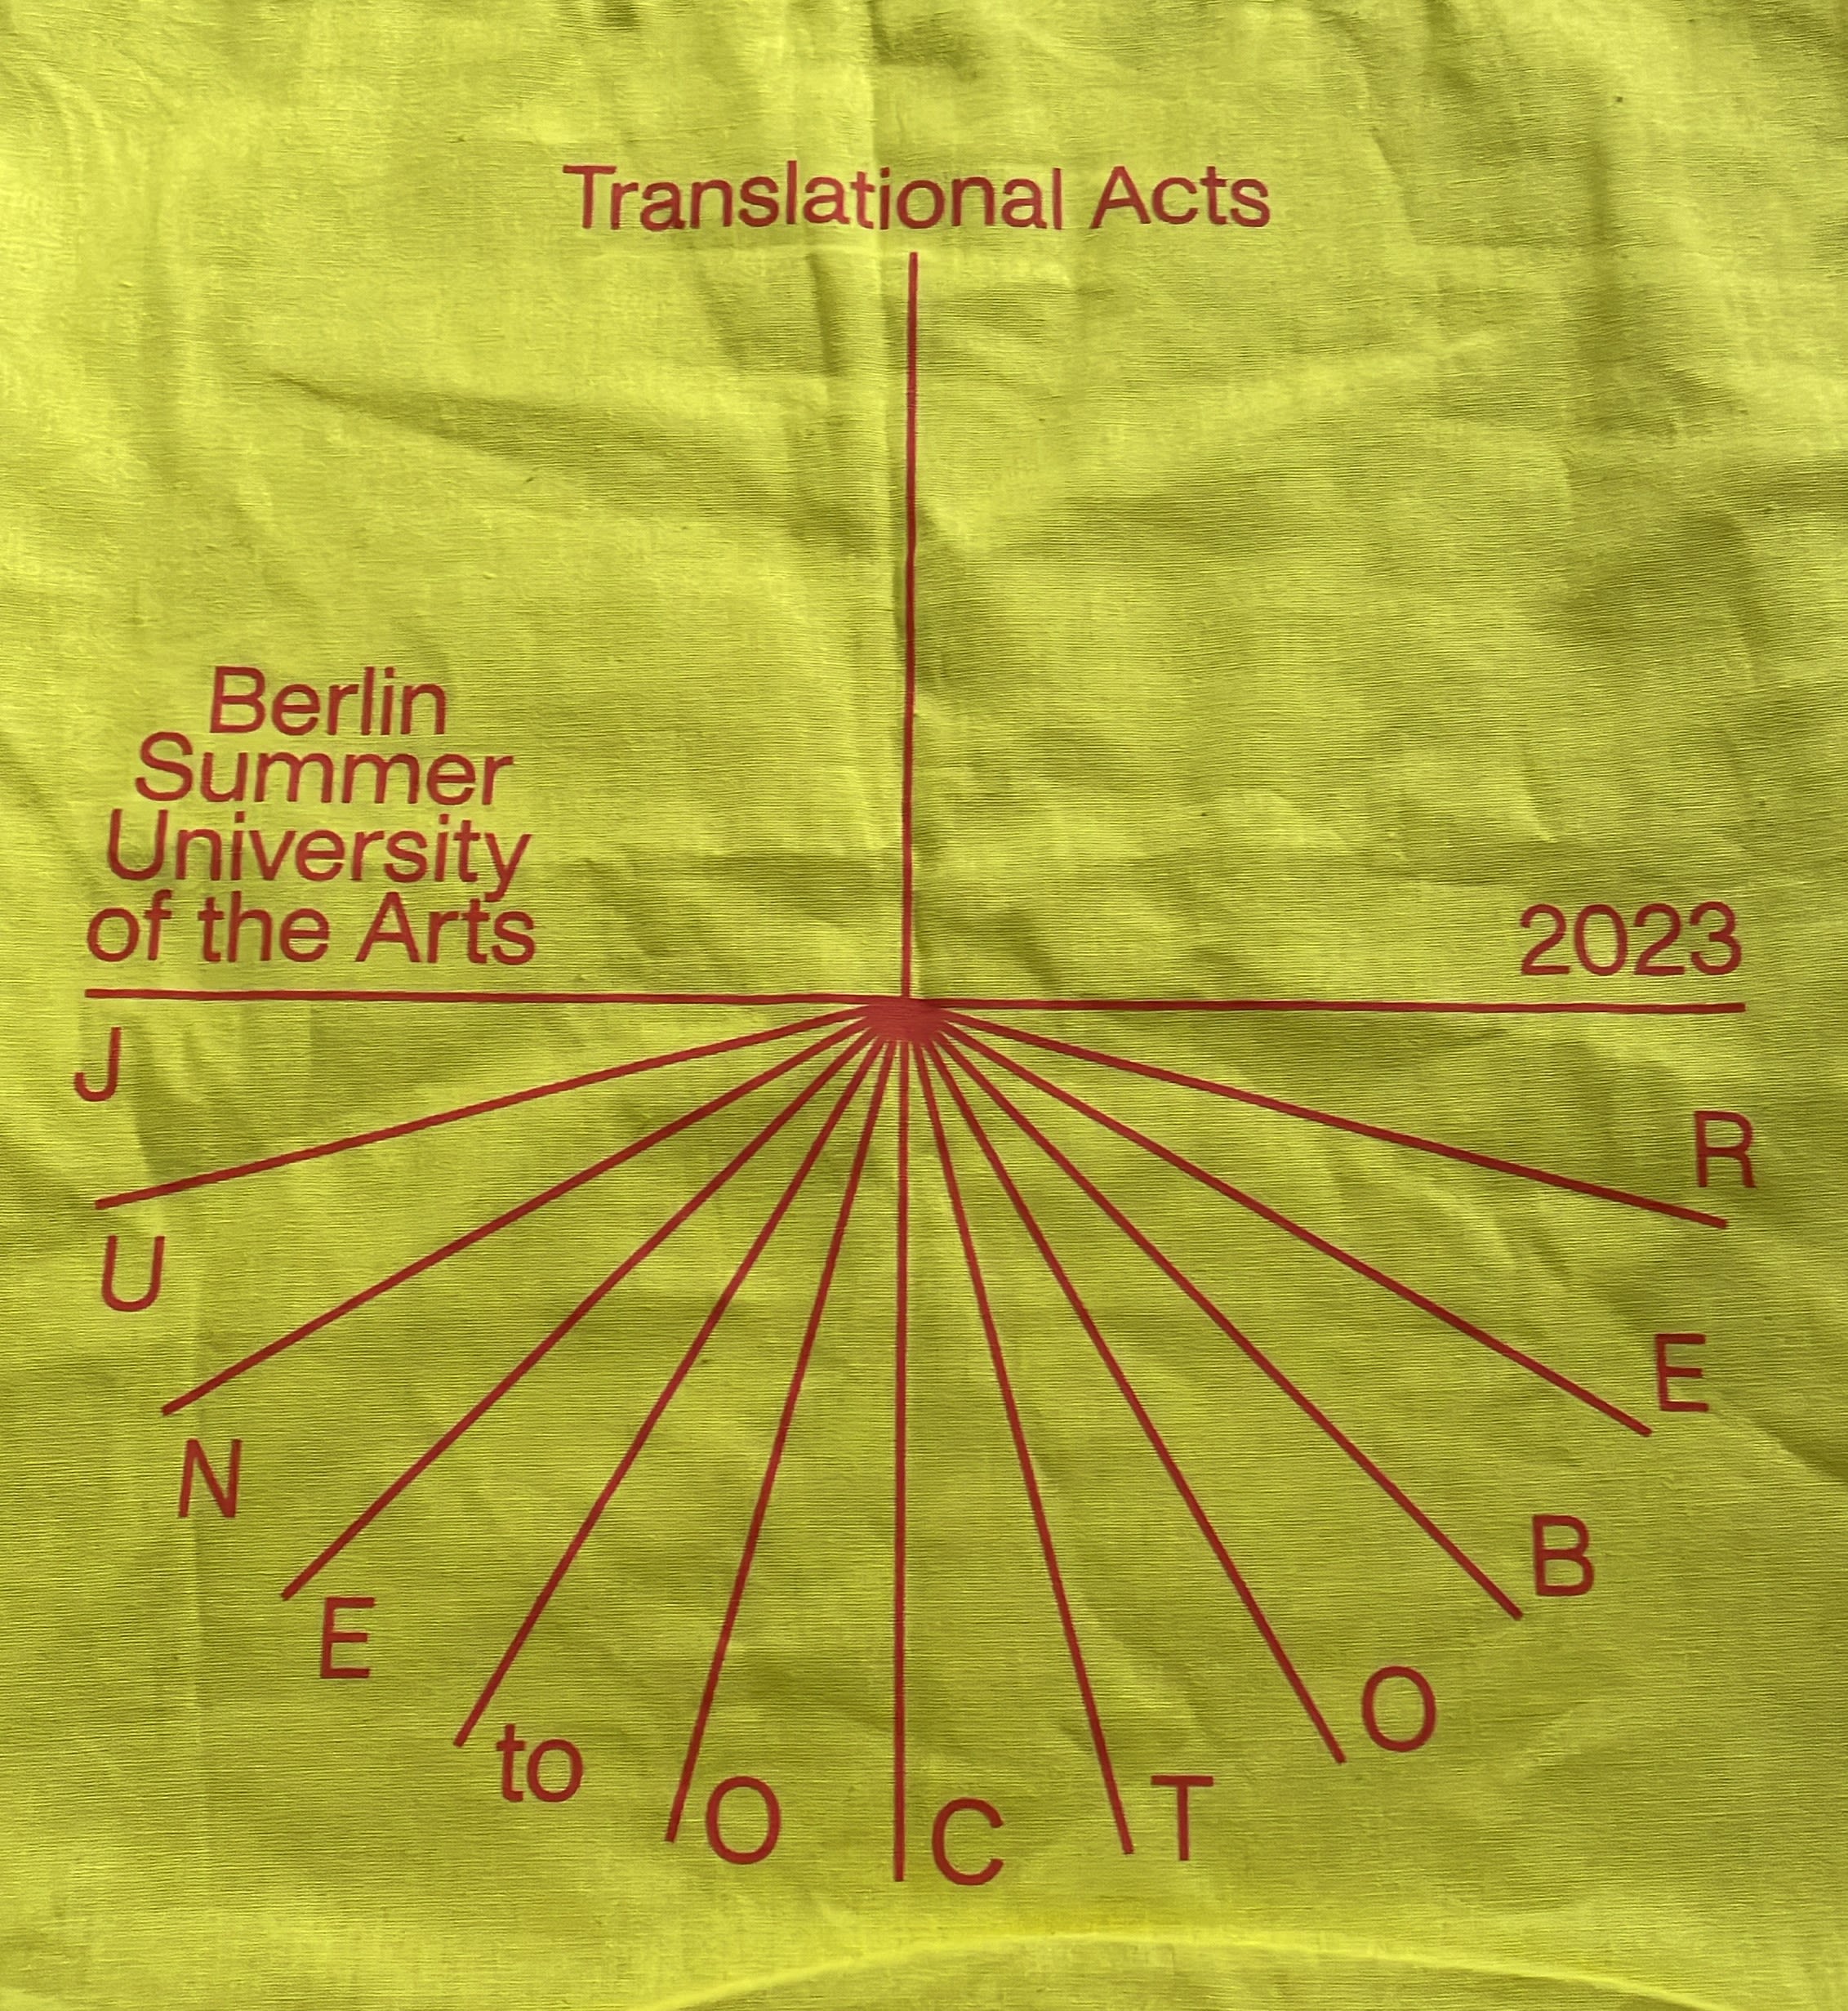 A yellow tote bag with the writing translational acts, June to October 